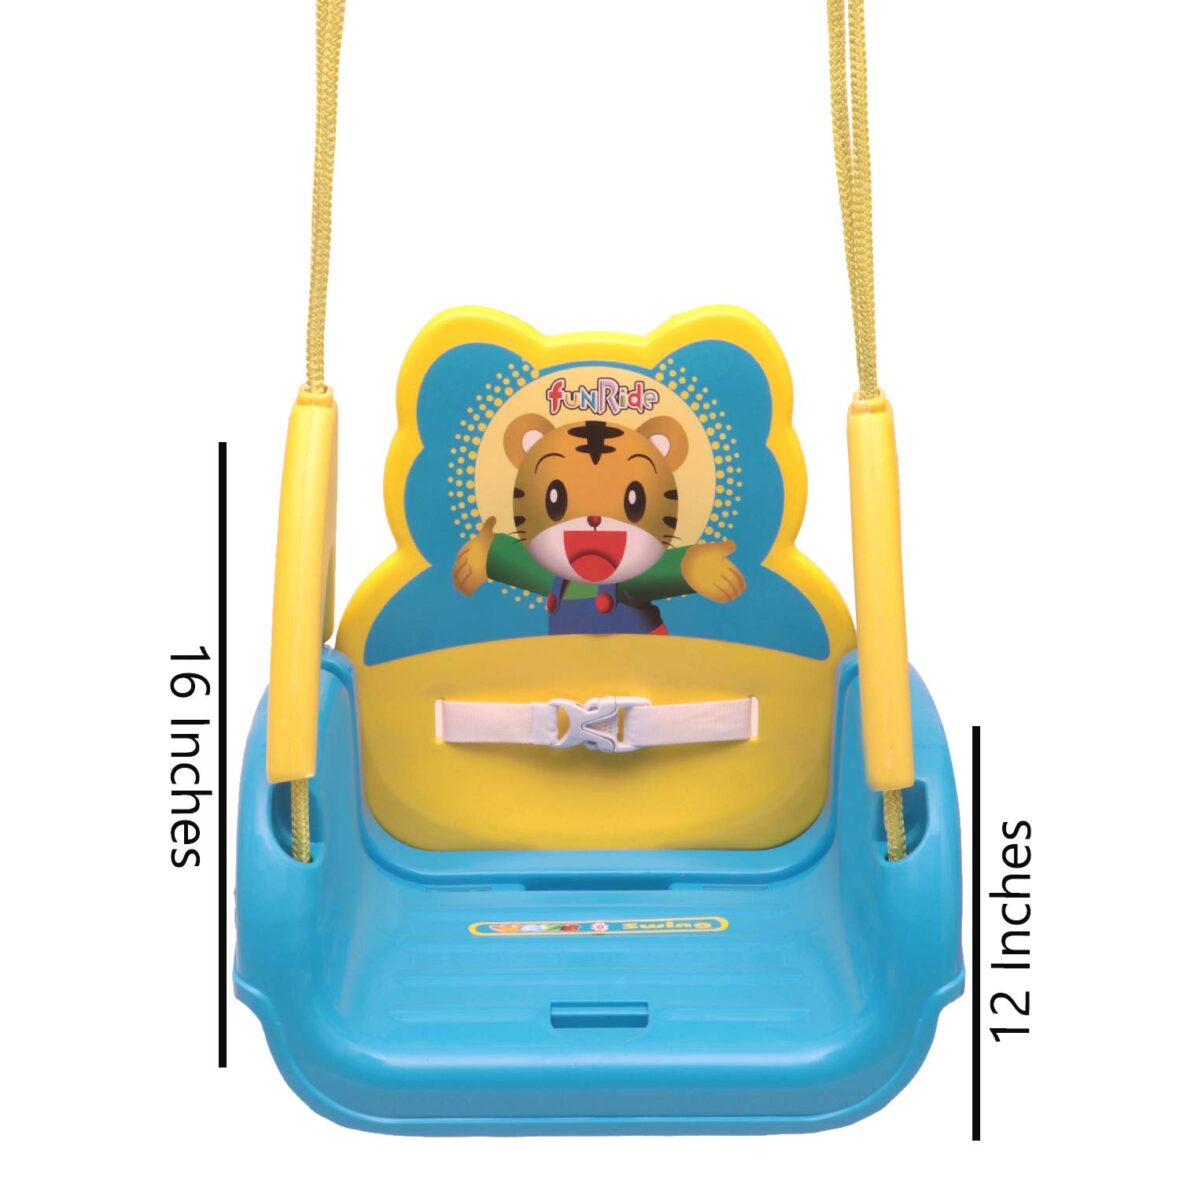 Fun Ride Plastic Musical 3 in 1 Adjustable Swing for Kids(Blue)